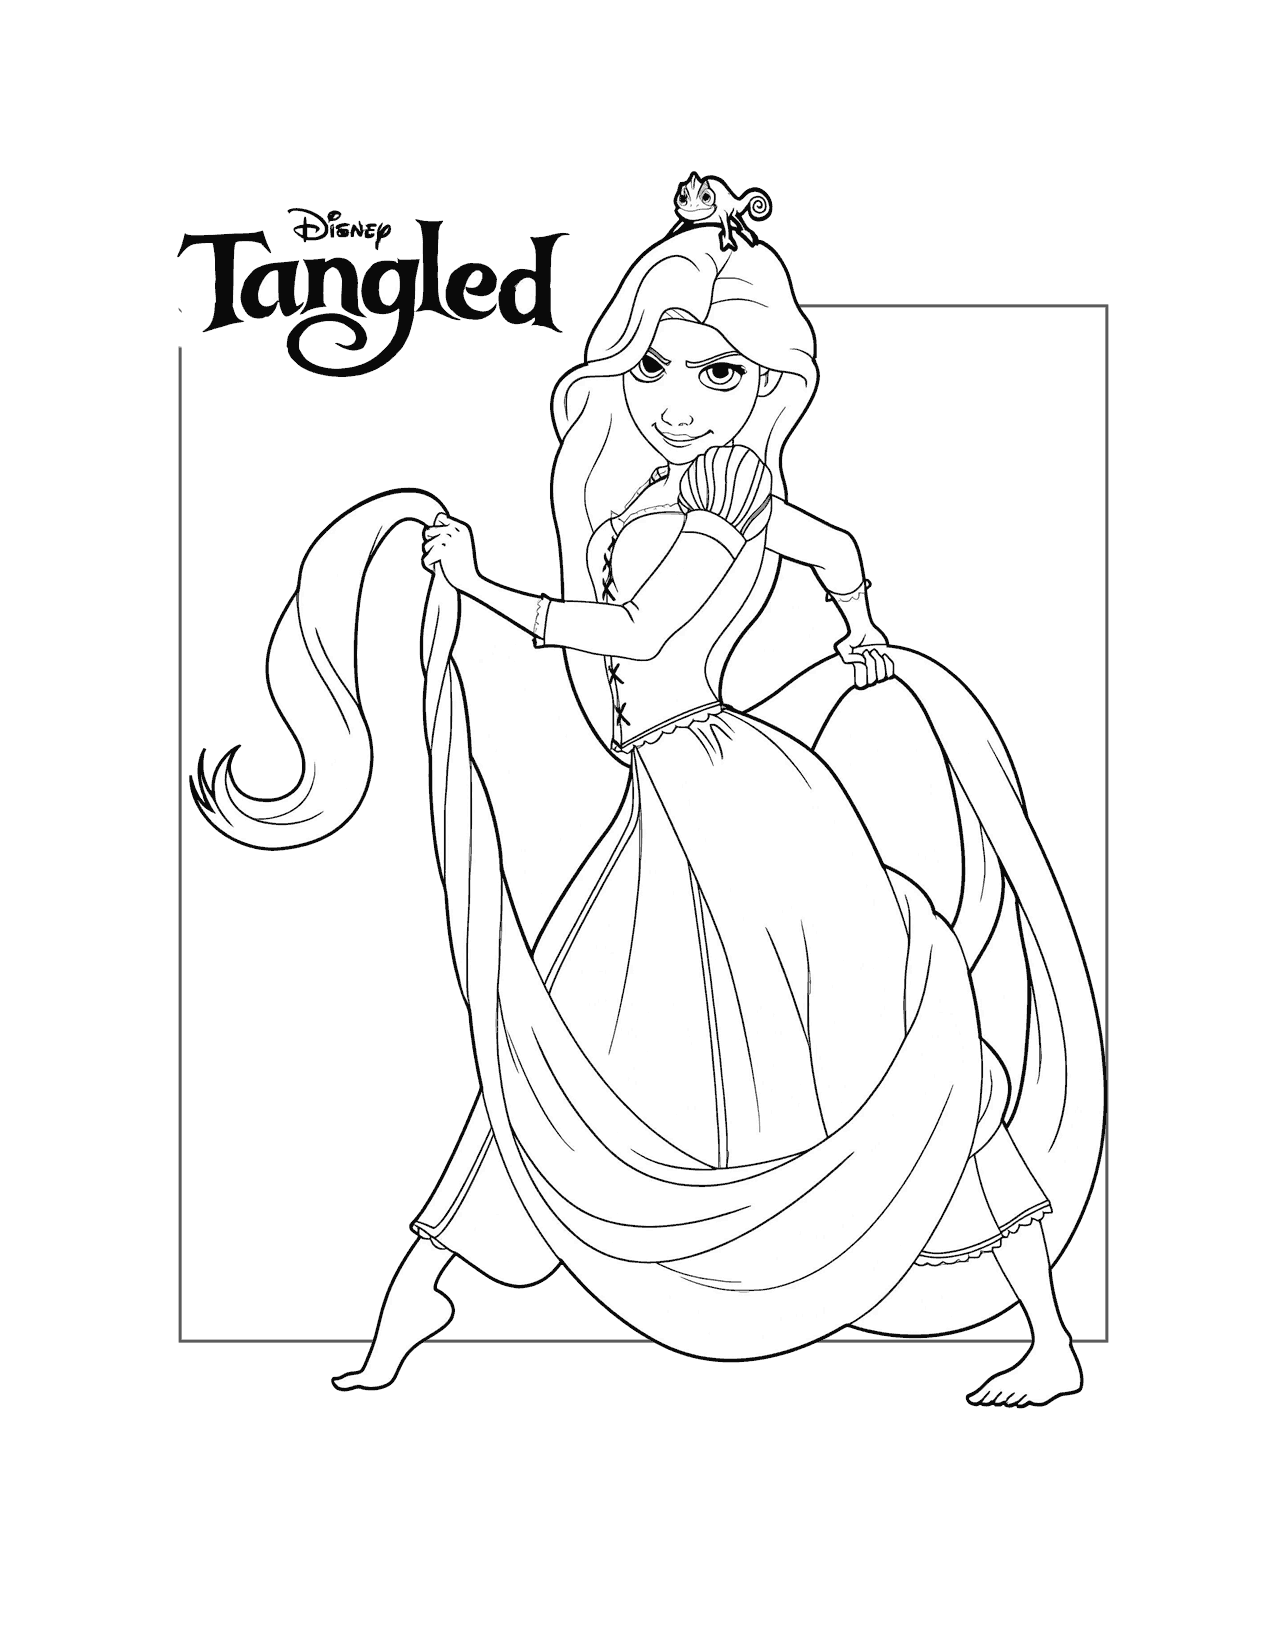 Tangled Coloring Page